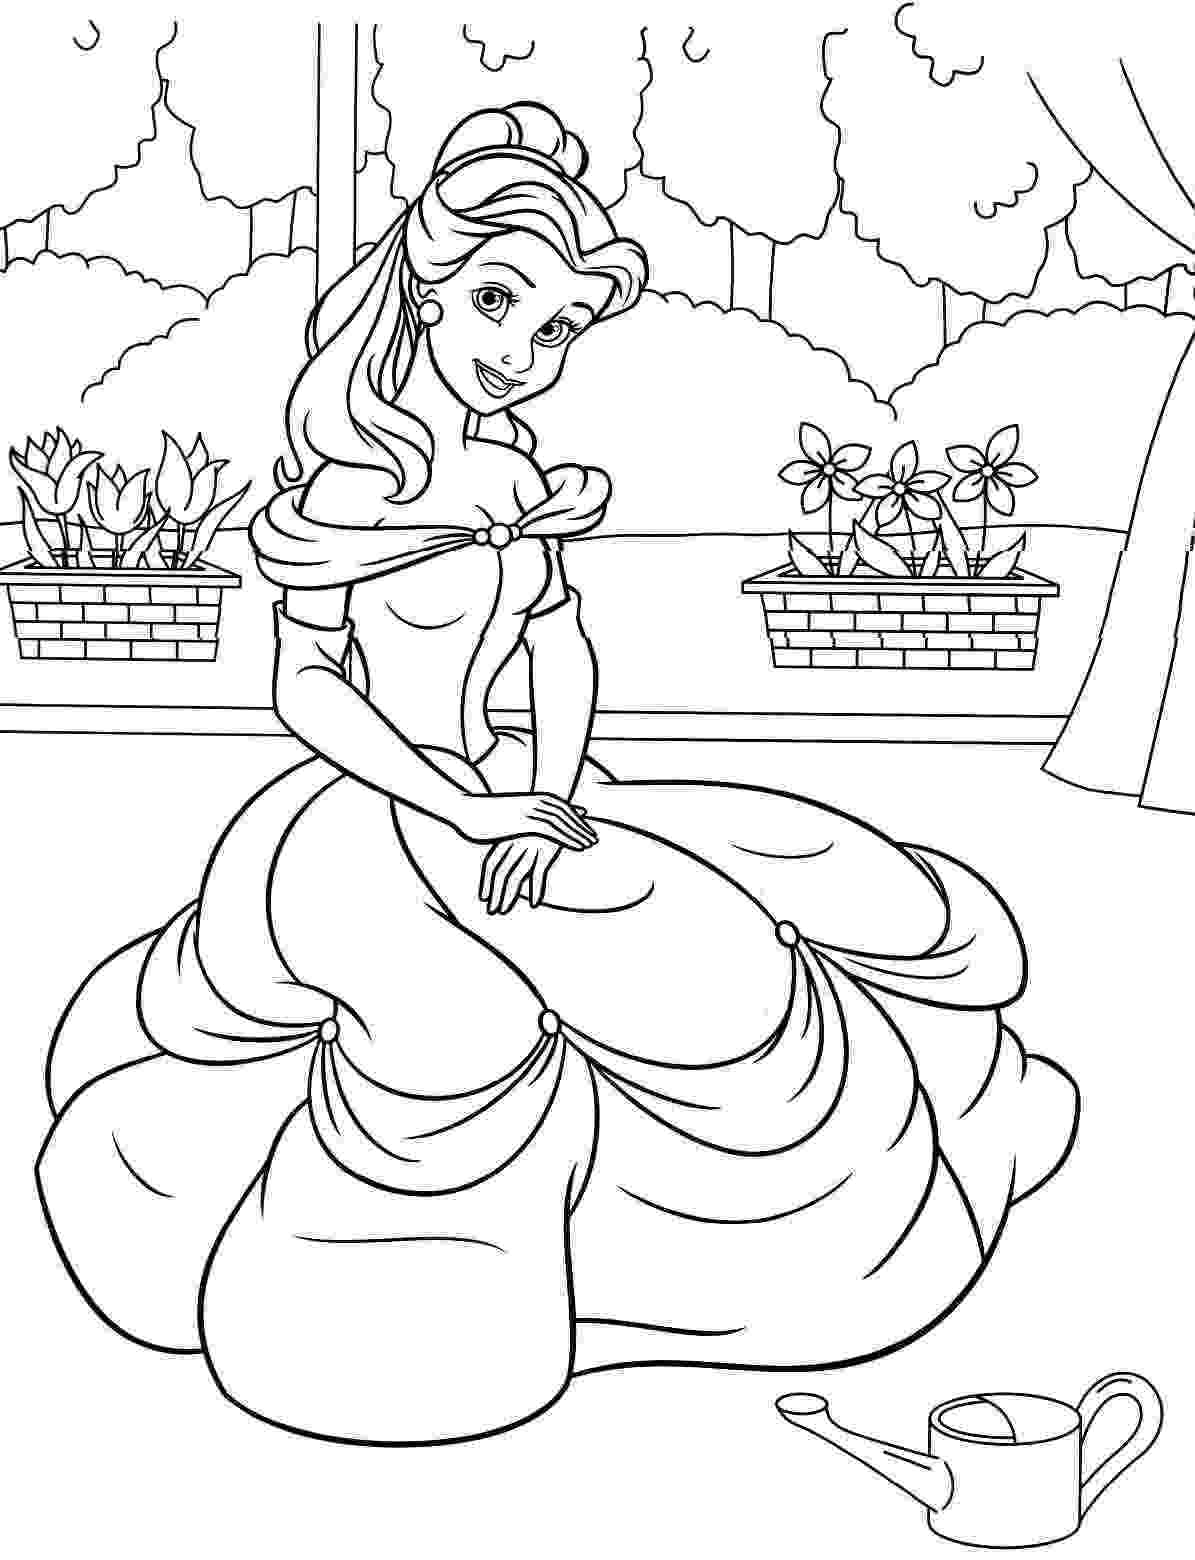 coloring pages for girls princess disney princess belle coloring pages for girls examples girls coloring pages princess for 